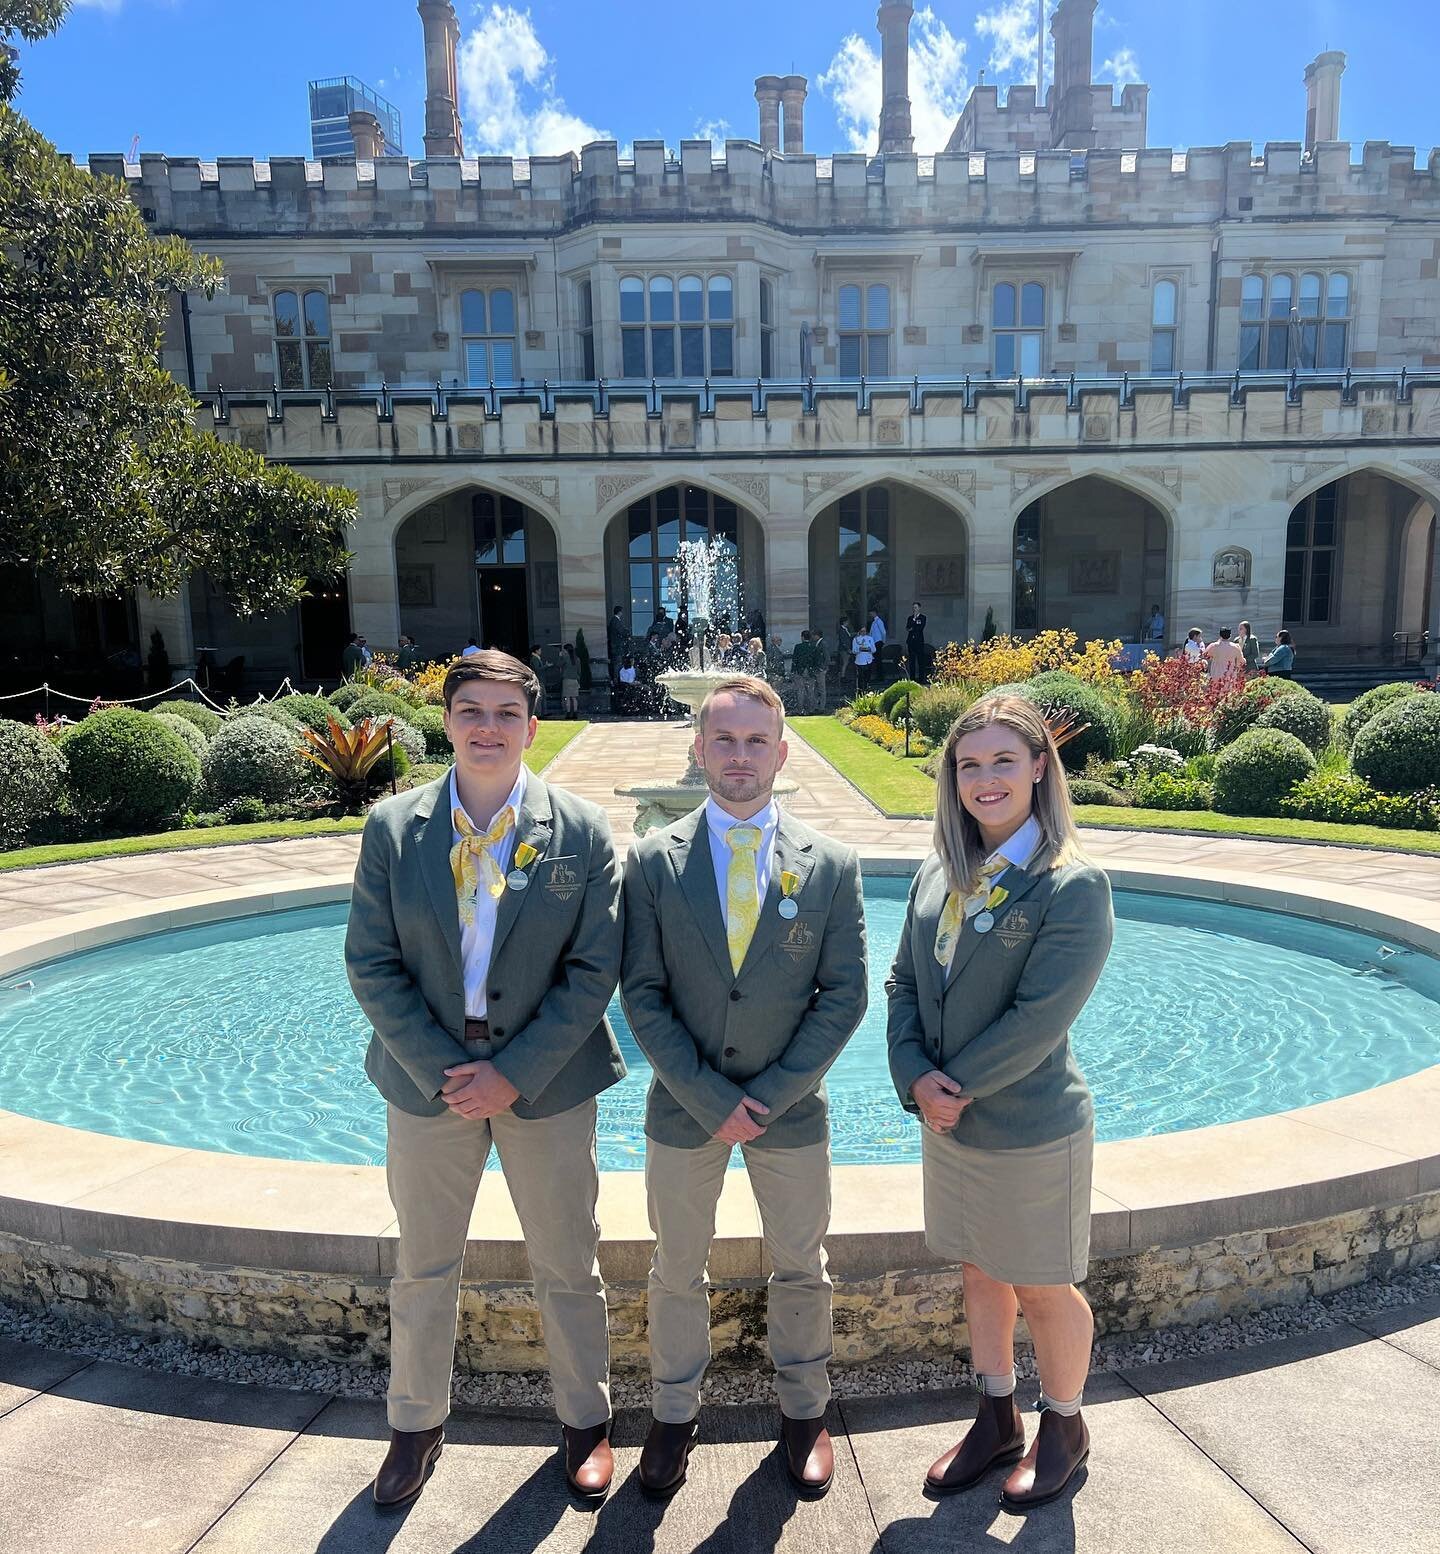 Congratulations to Boss Lady @carissaholland_  as well as Coach @naomi.debruine and Coach @justindanielholland for recieving the Australian Sports Medal at the Government House today!

Well deserved 👏

#australiansportsmedal #wrestling